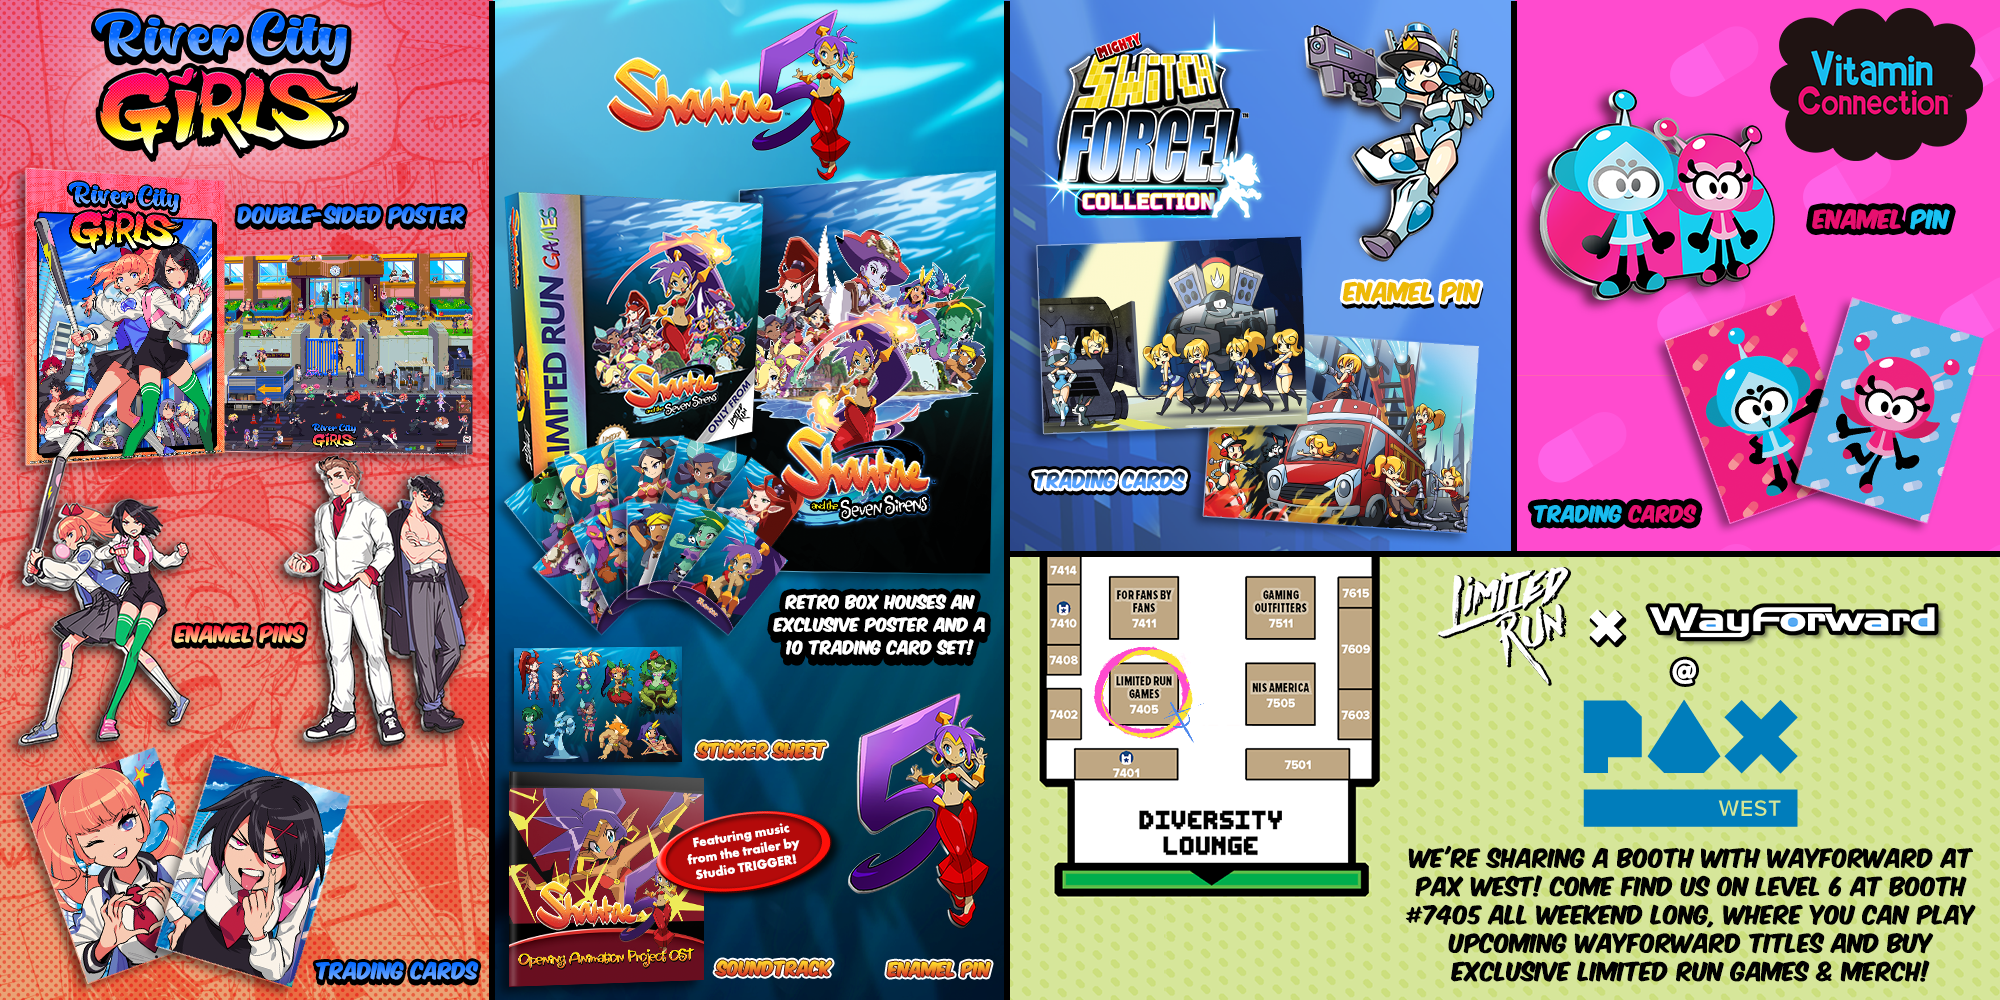 shantae and the seven sirens switch physical